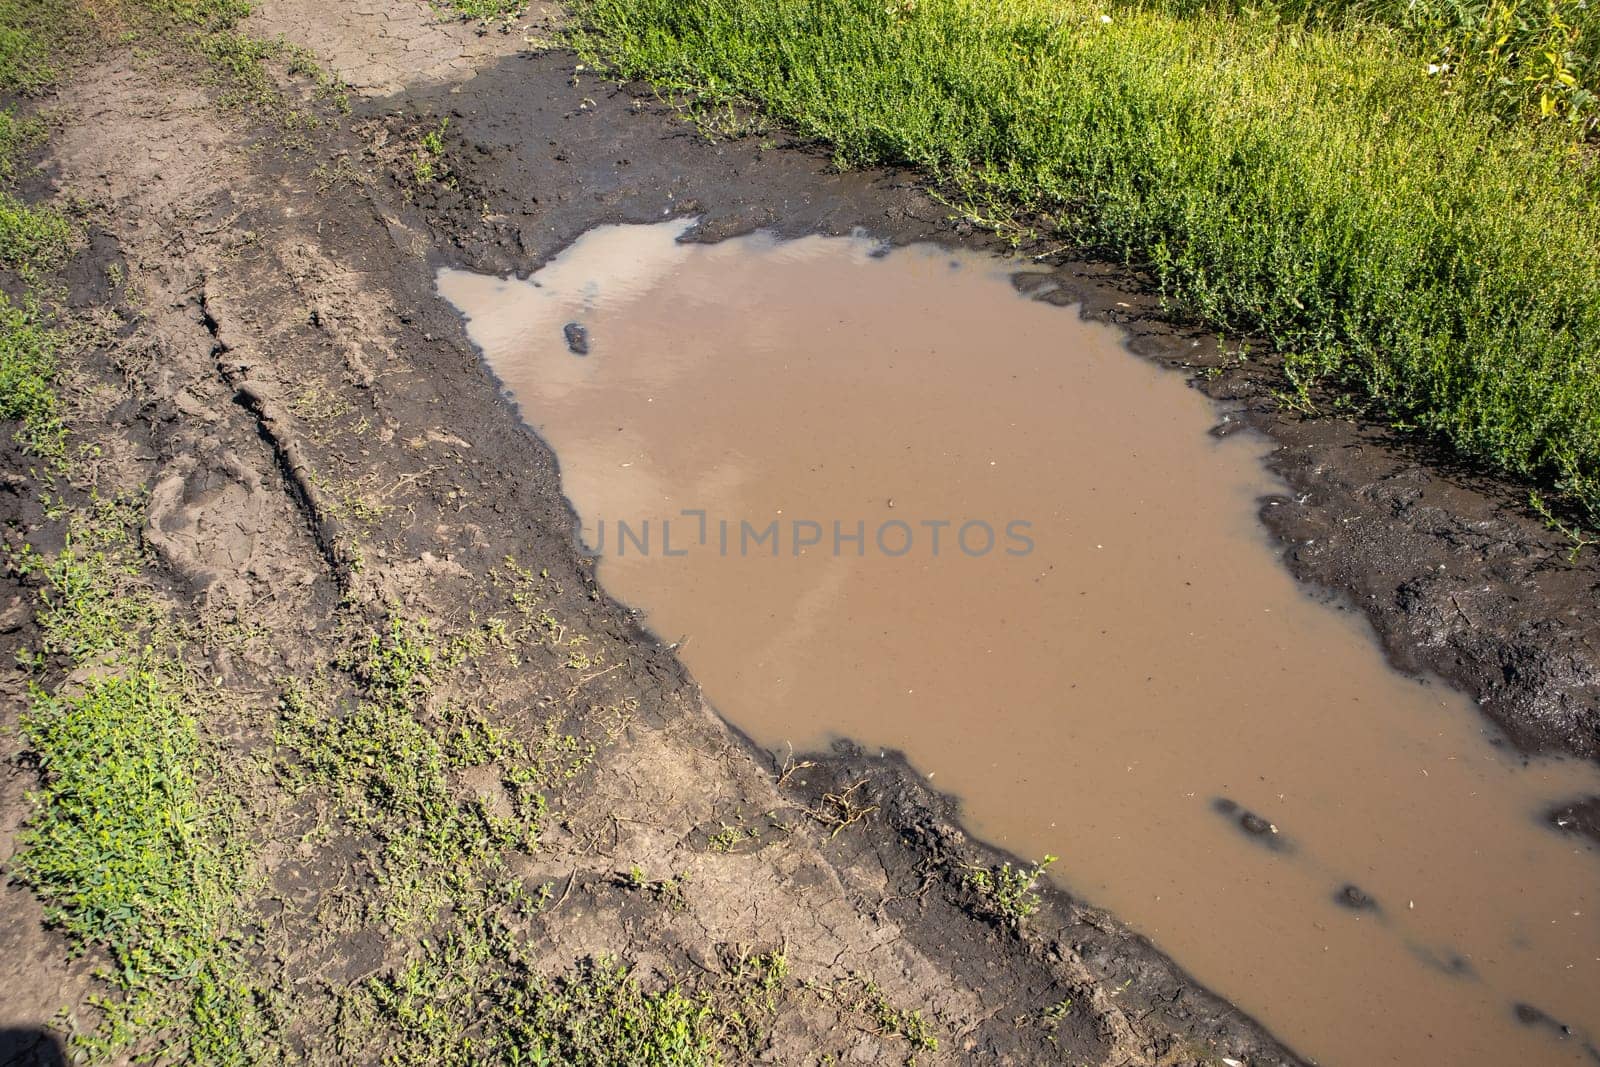 A close-up view of puddles of water on a muddy country road with a track by claire_lucia